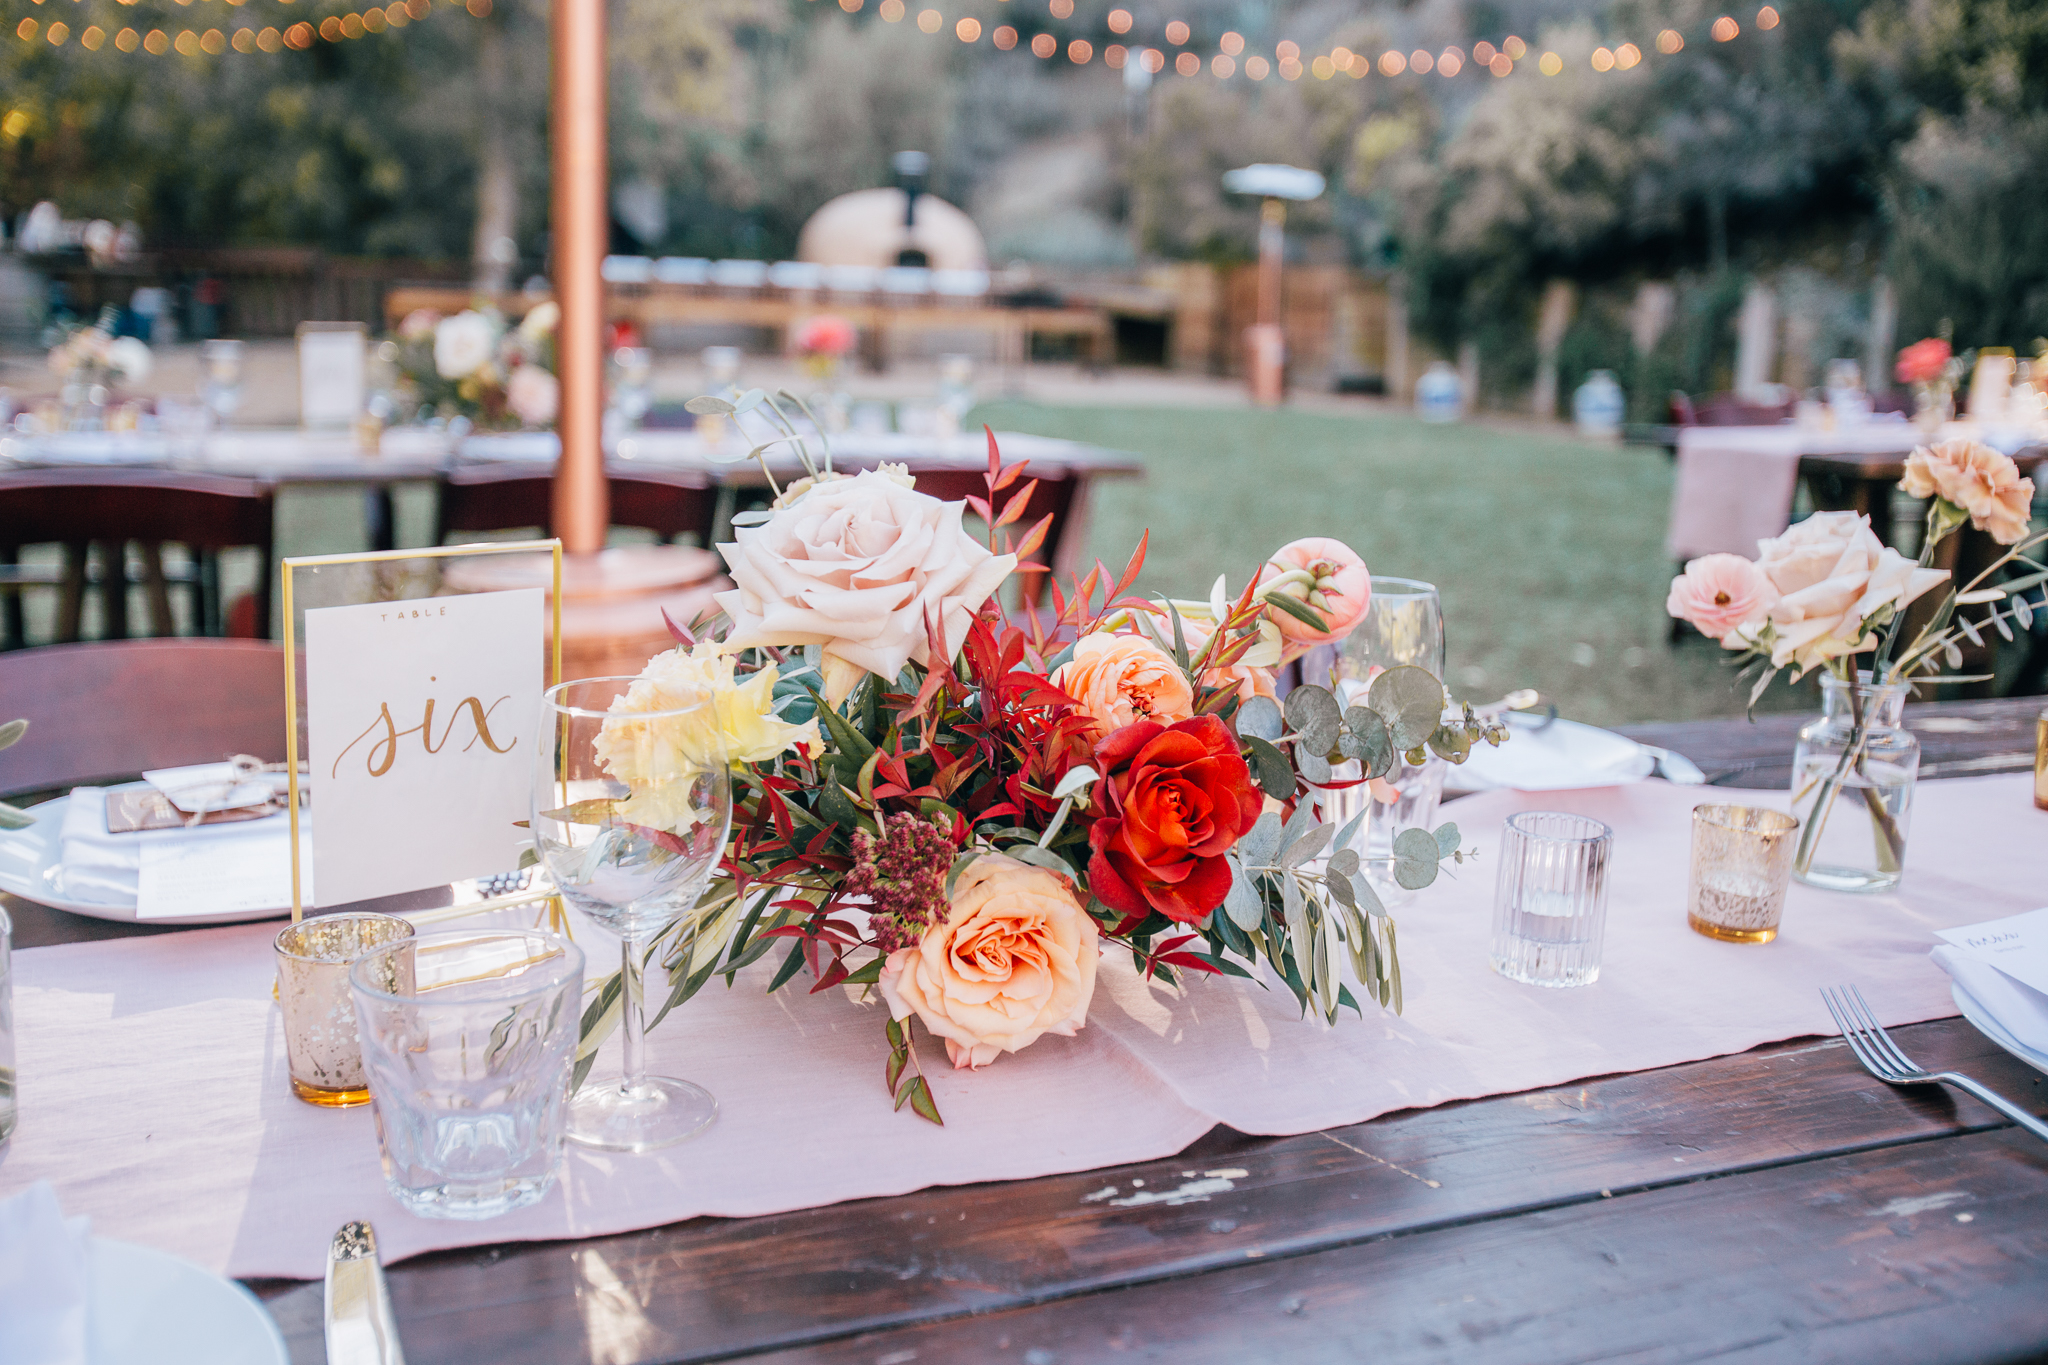 bright and vibrant wedding reception at the 1909 with wooden farmhouse tables, wood chairs and colorful floral centerpieces